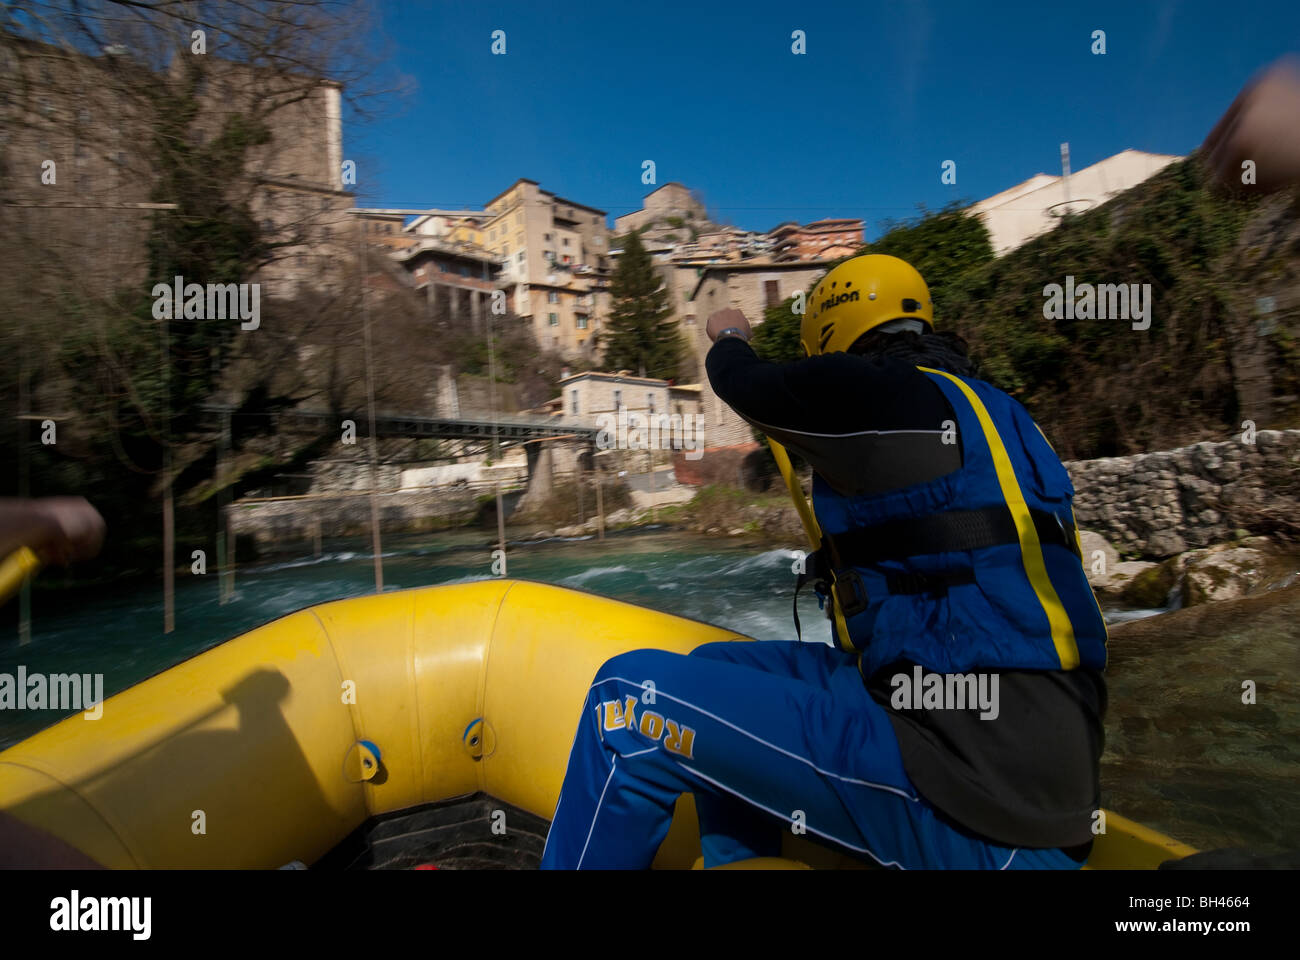 Rafting on Aniene River, Subiaco, Rome, Italy Stock Photo